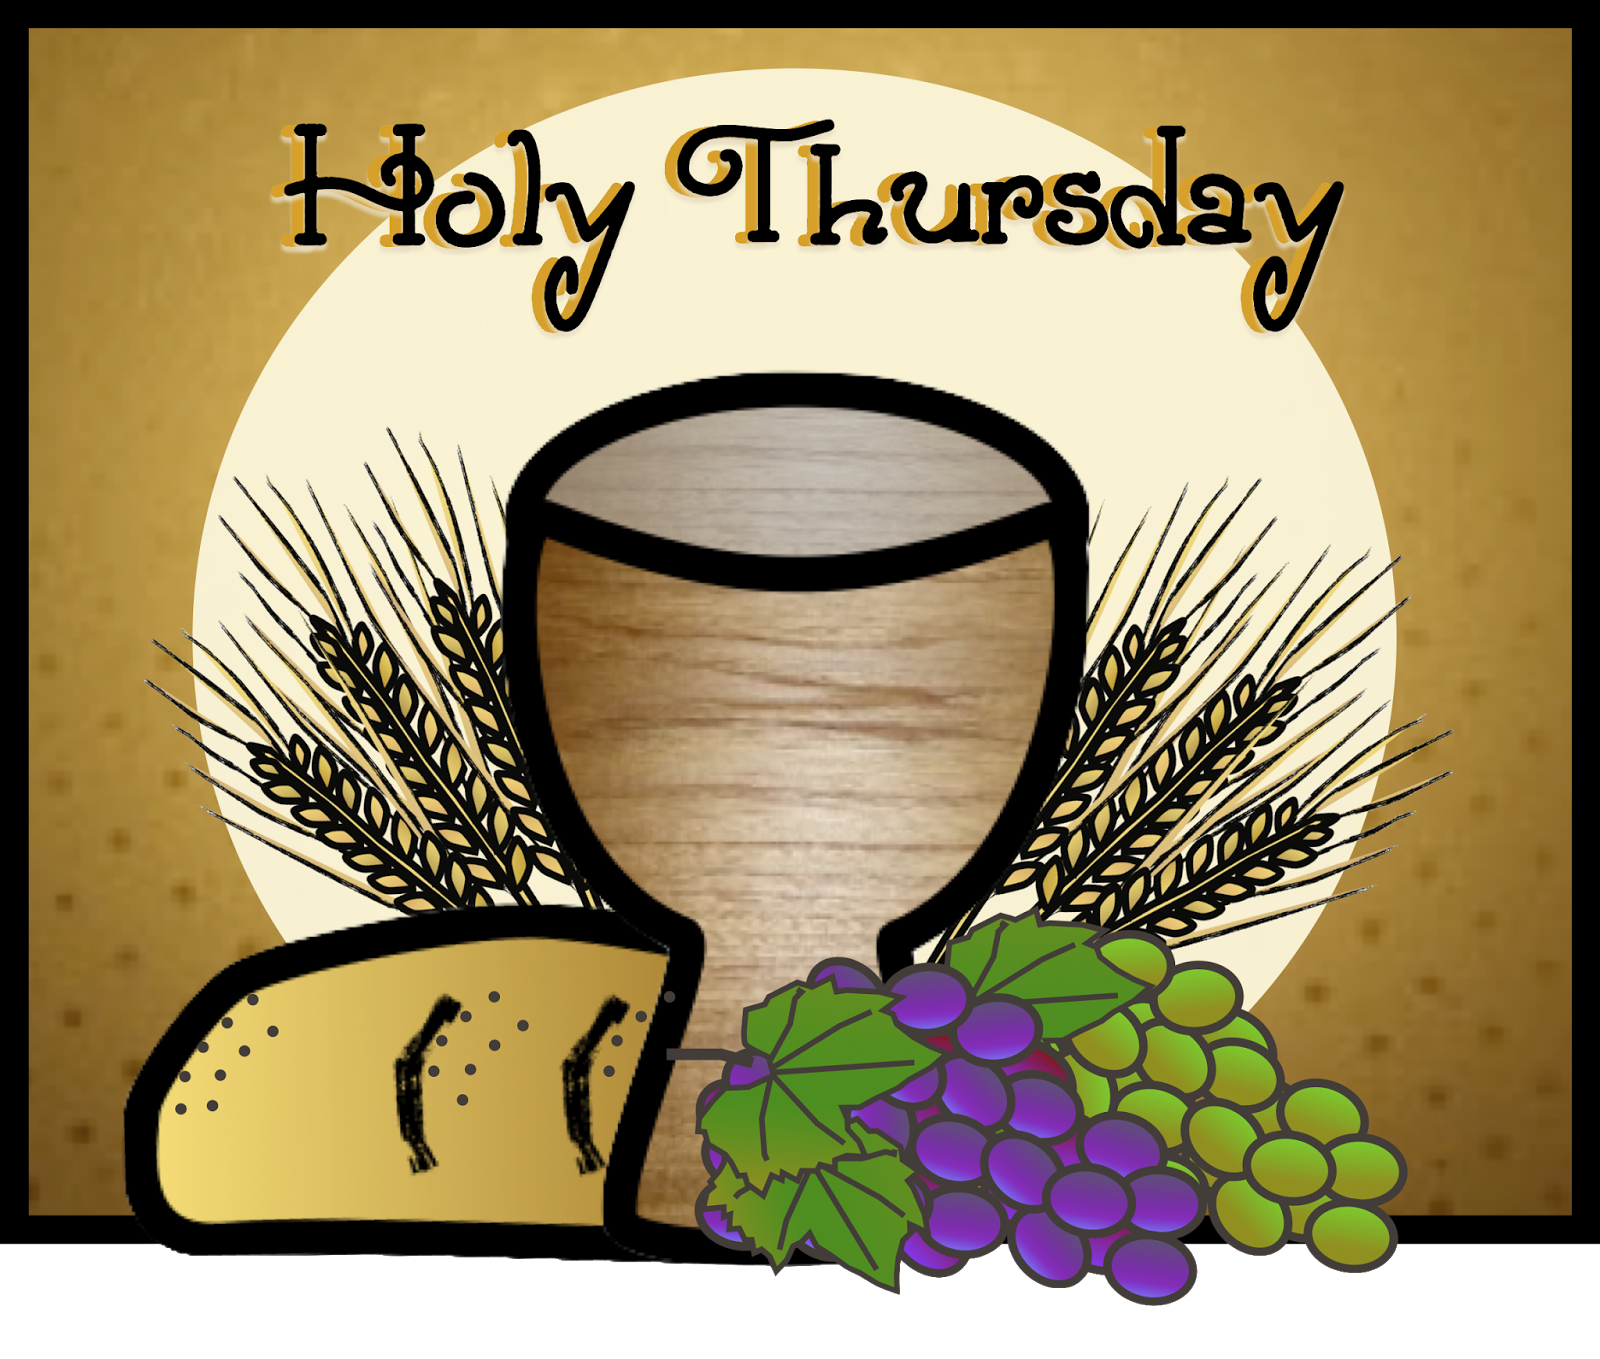 days-of-the-week-thursday-clipart-clip-art-library